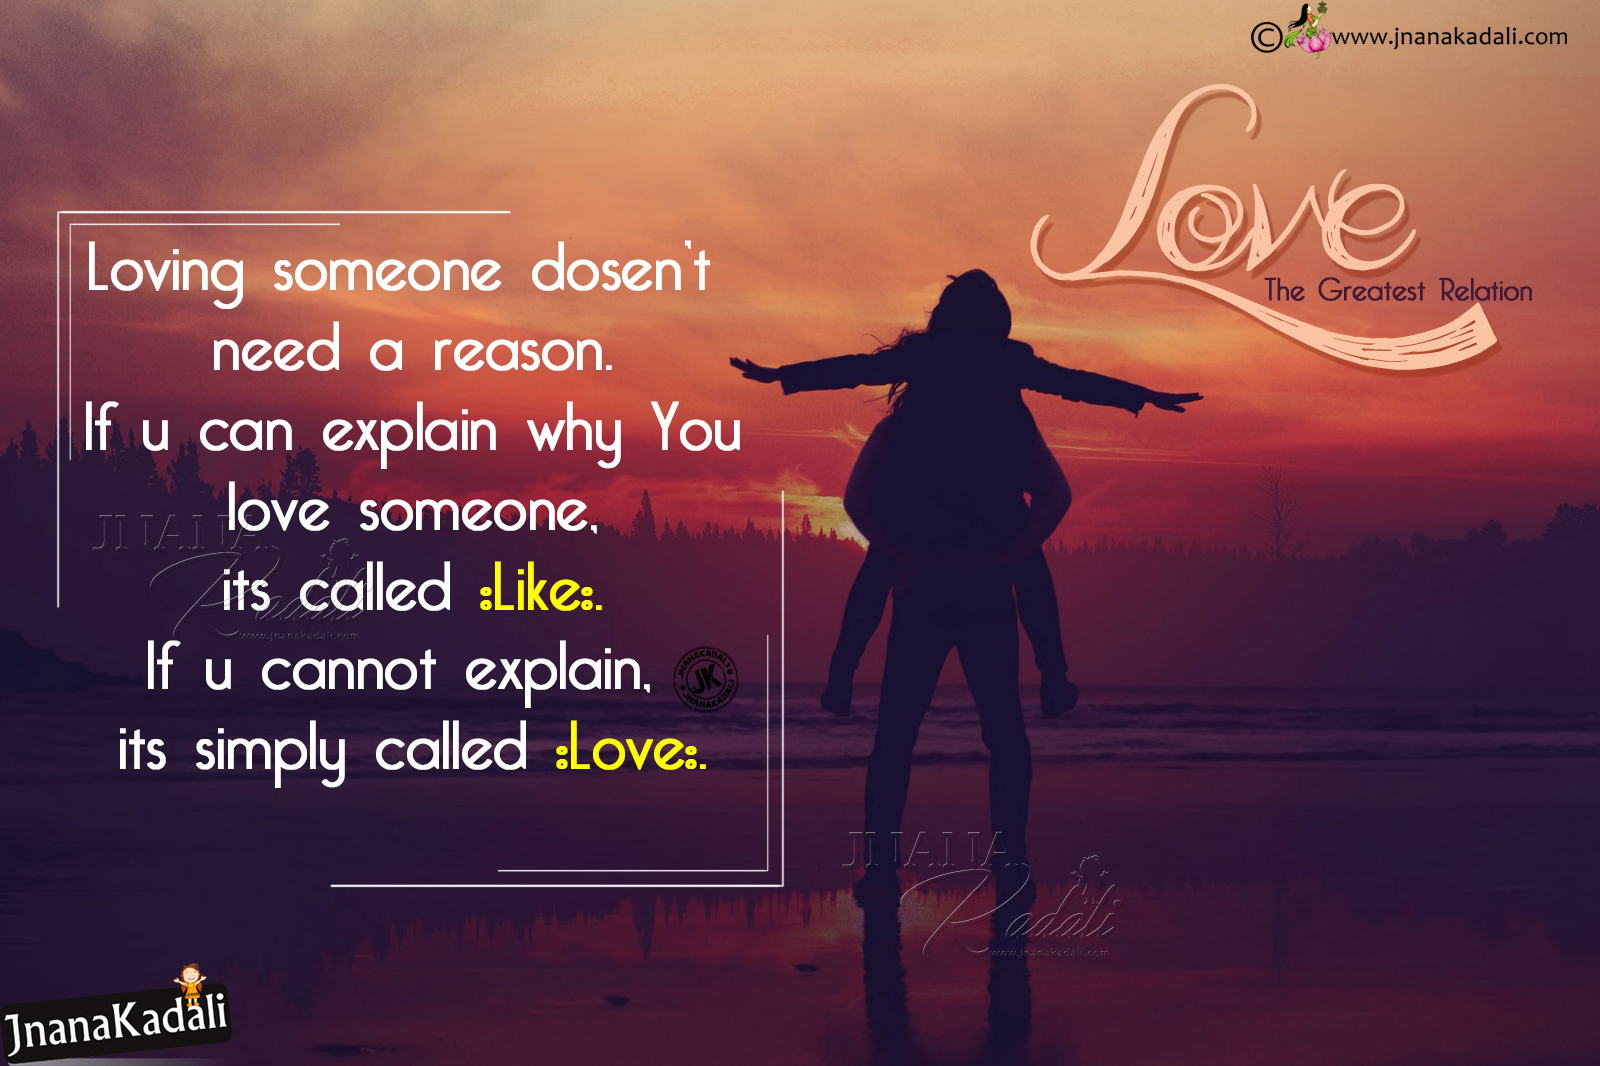 Heart Touching English Love messages-Love Couple hd wallpapers Free download  | JNANA  |Telugu Quotes|English quotes|Hindi quotes|Tamil quotes |Dharmasandehalu|